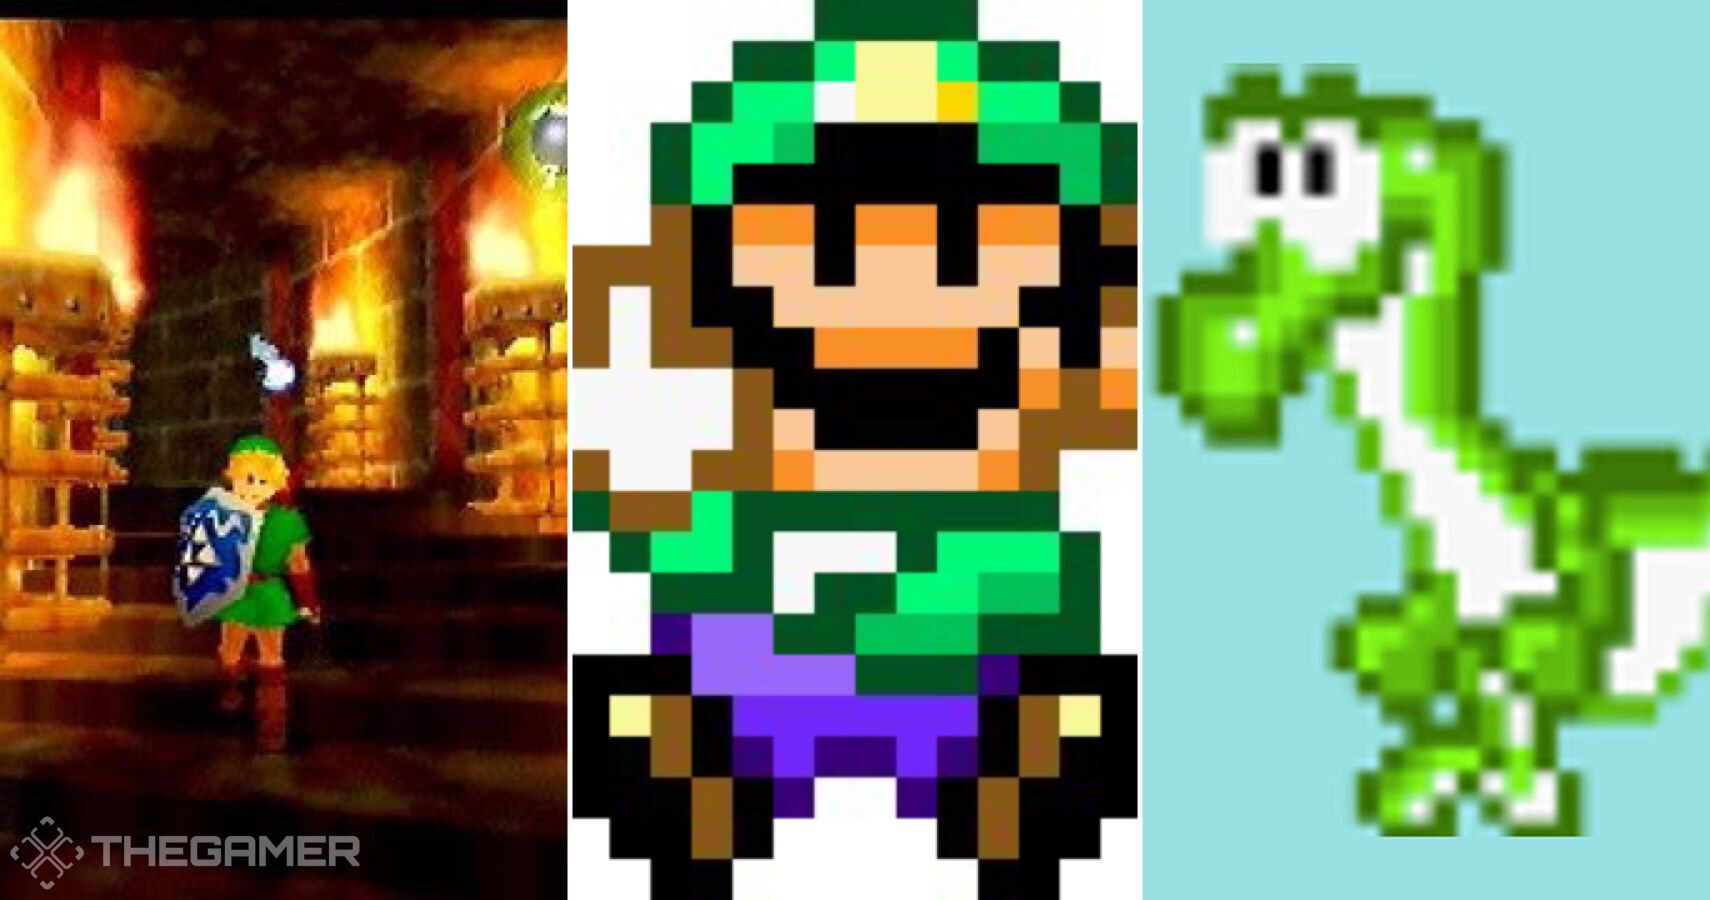 RUMOR: 2nd Round of Gigaleaks - N64 Leak Containing Legend of Zelda: Ocarina  of Time 2 And Ultra Mario Bros 64 : r/gamernews